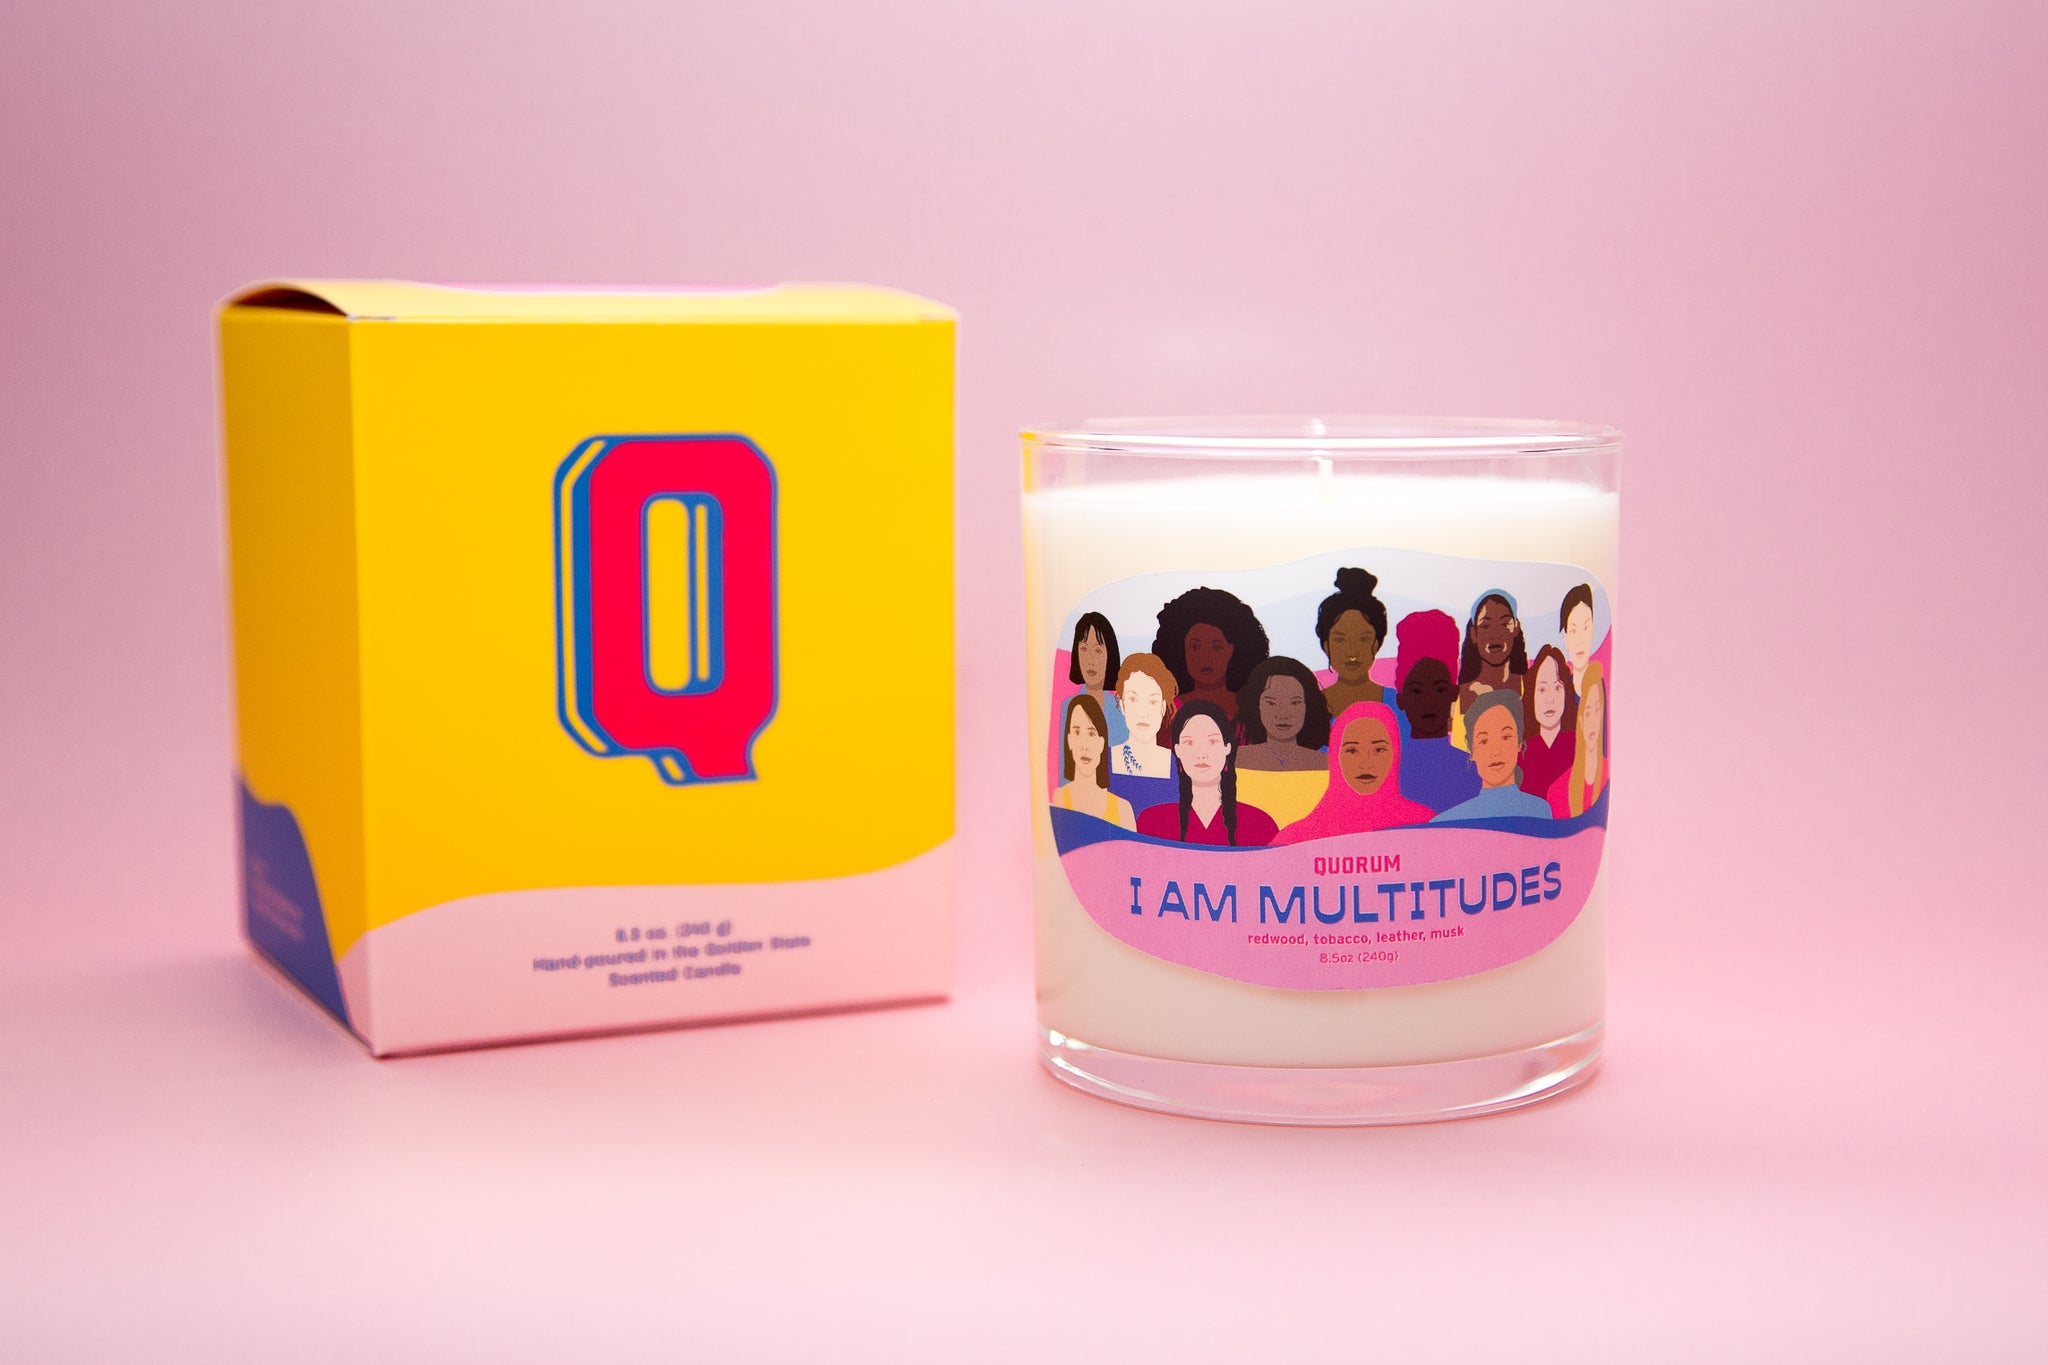 photograph of the I am multitudes affirmation candle. Photograph is on a pink background, with yellow product box next to the candle.